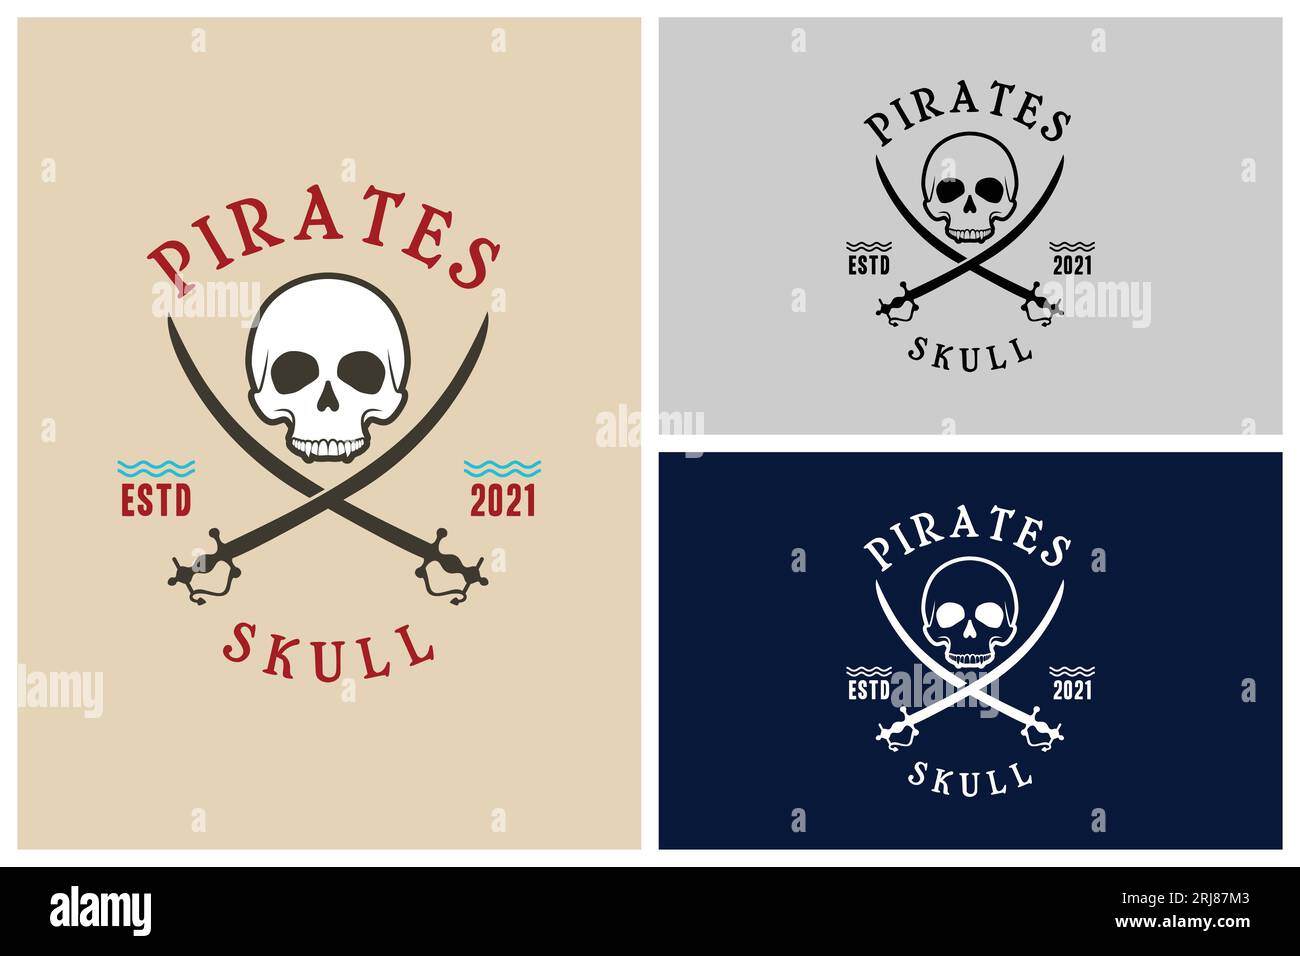 Simple Pirates Skull with Crossing Swords Vintage for Boat Ship Sailor Nautical Navy logo design Stock Vector